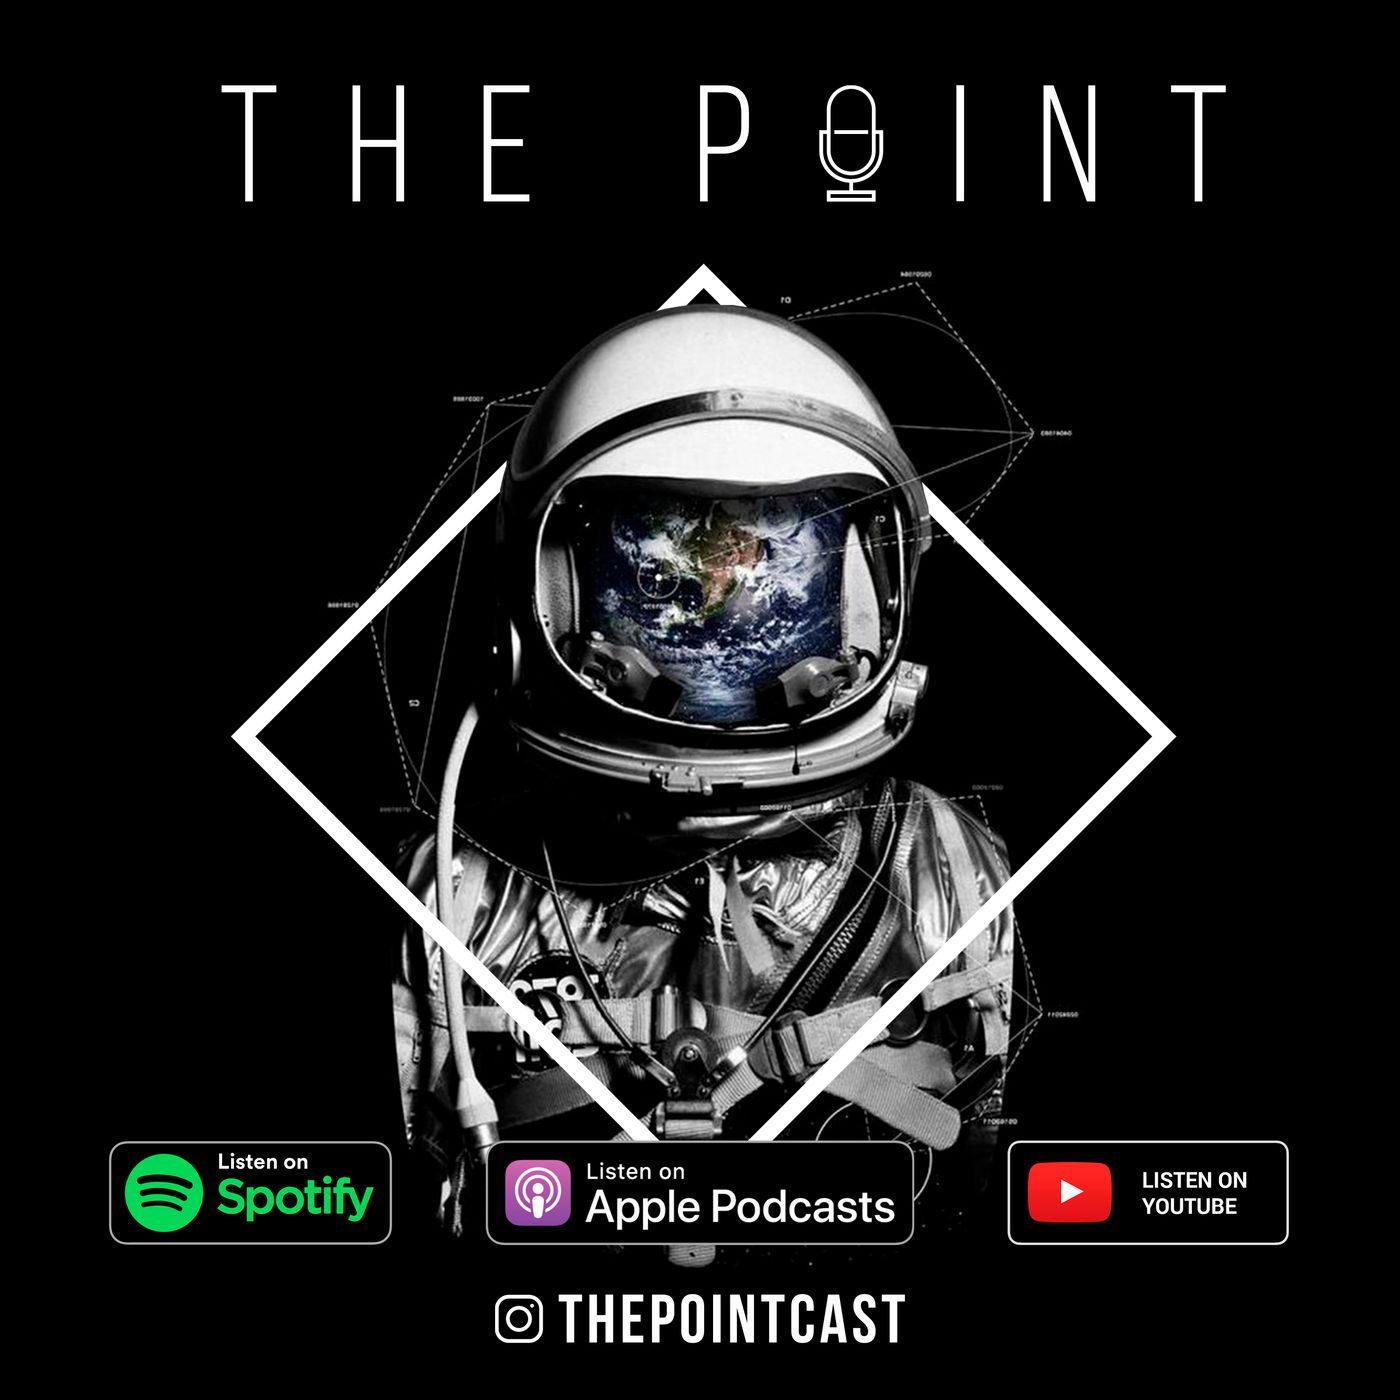 ThePoint